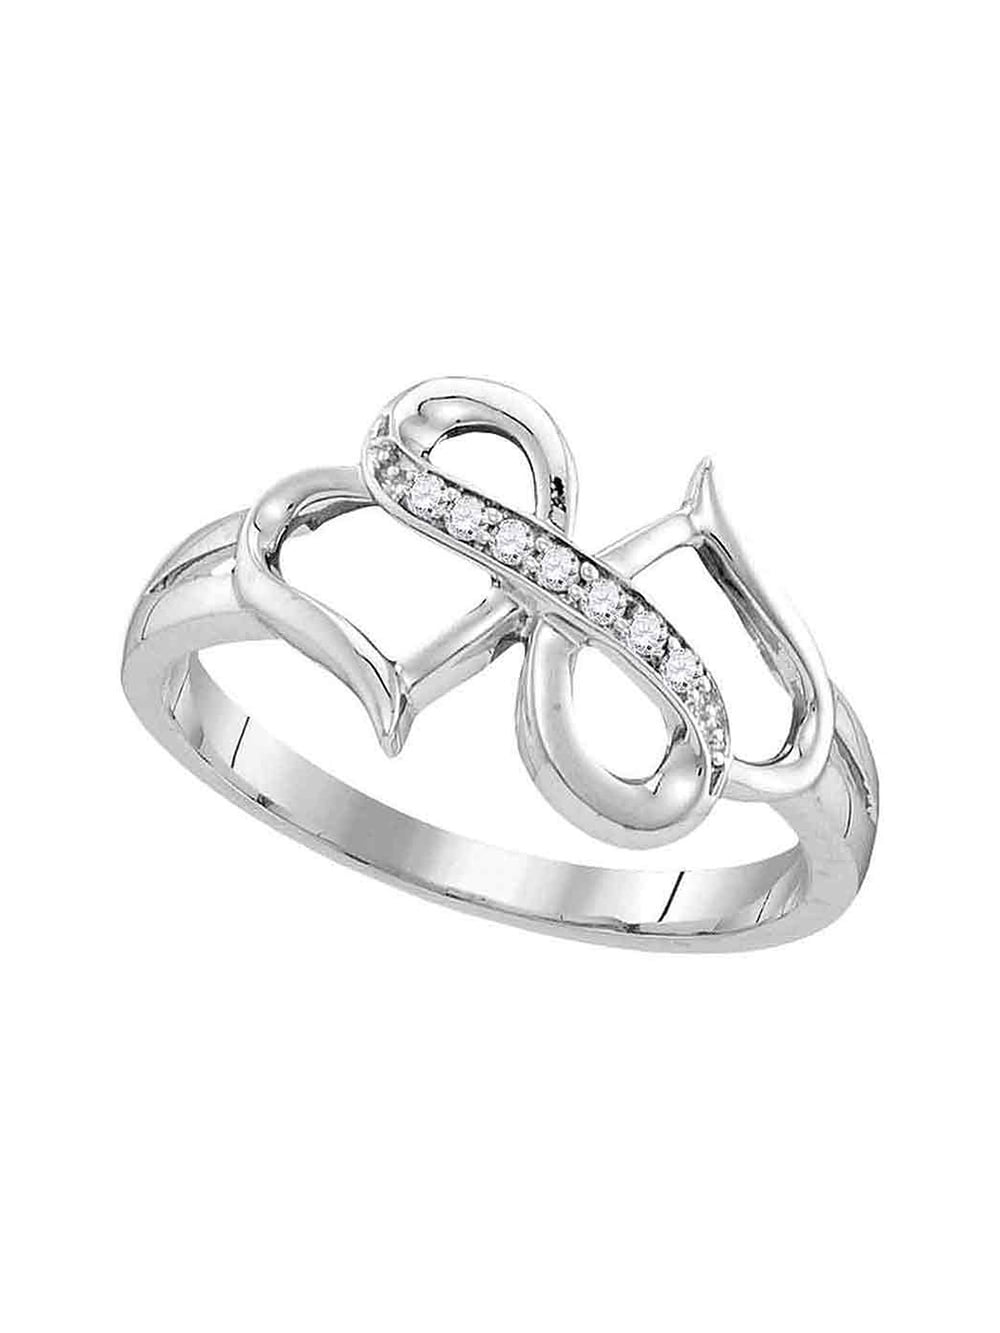 Details about   2.55 CT Round Cut Diamond Wedding Bridal Ring Band Set in 14k White Gold Finish 